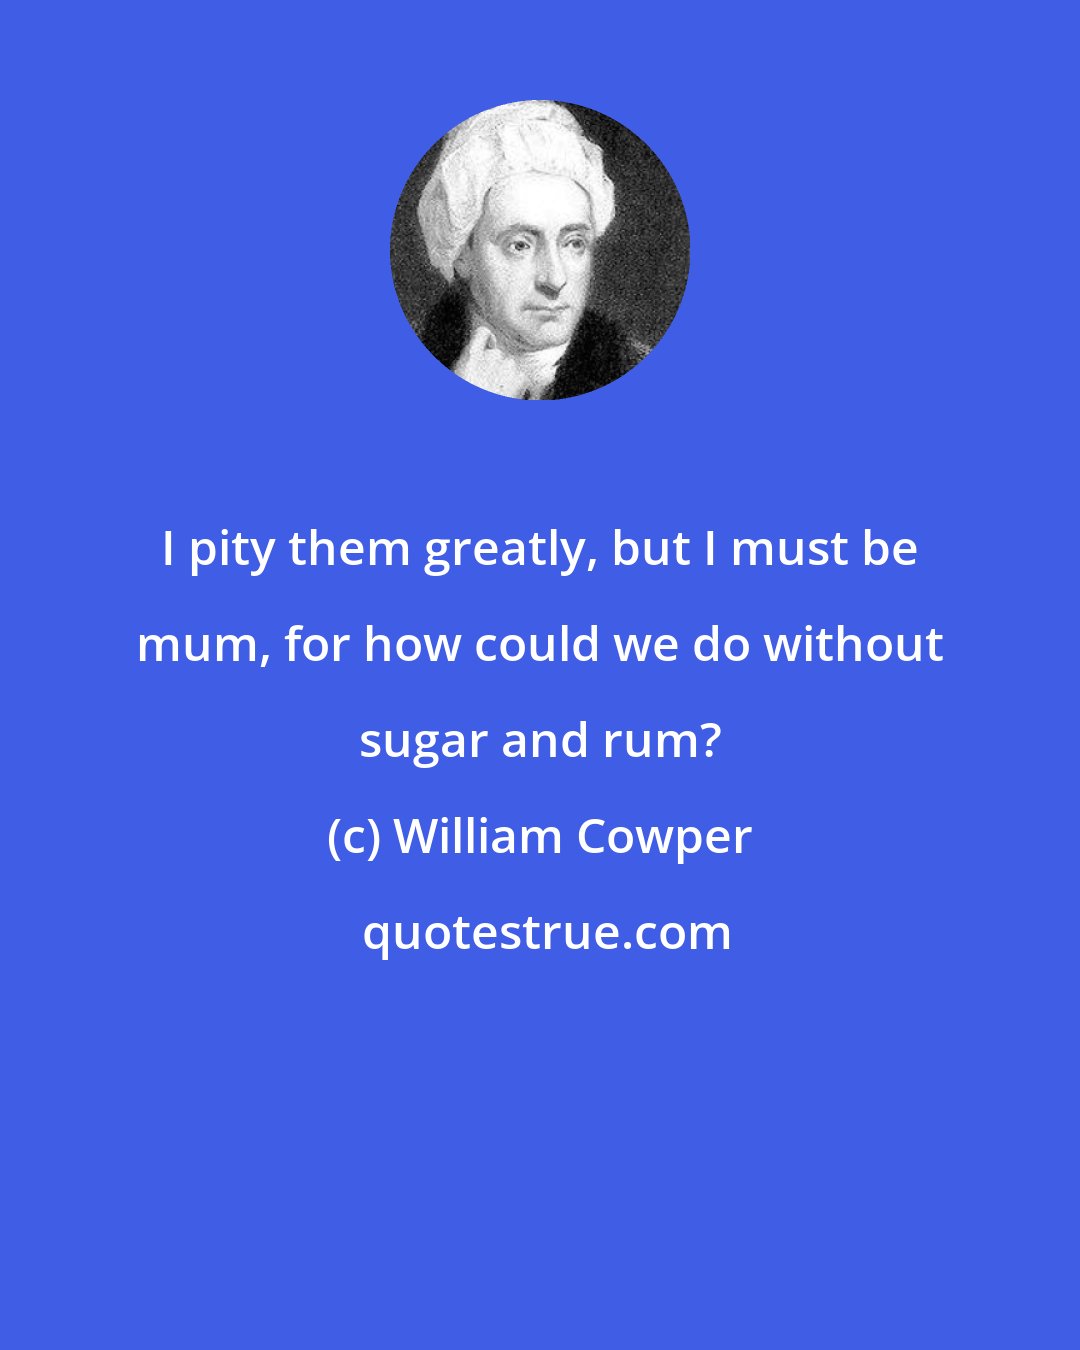 William Cowper: I pity them greatly, but I must be mum, for how could we do without sugar and rum?